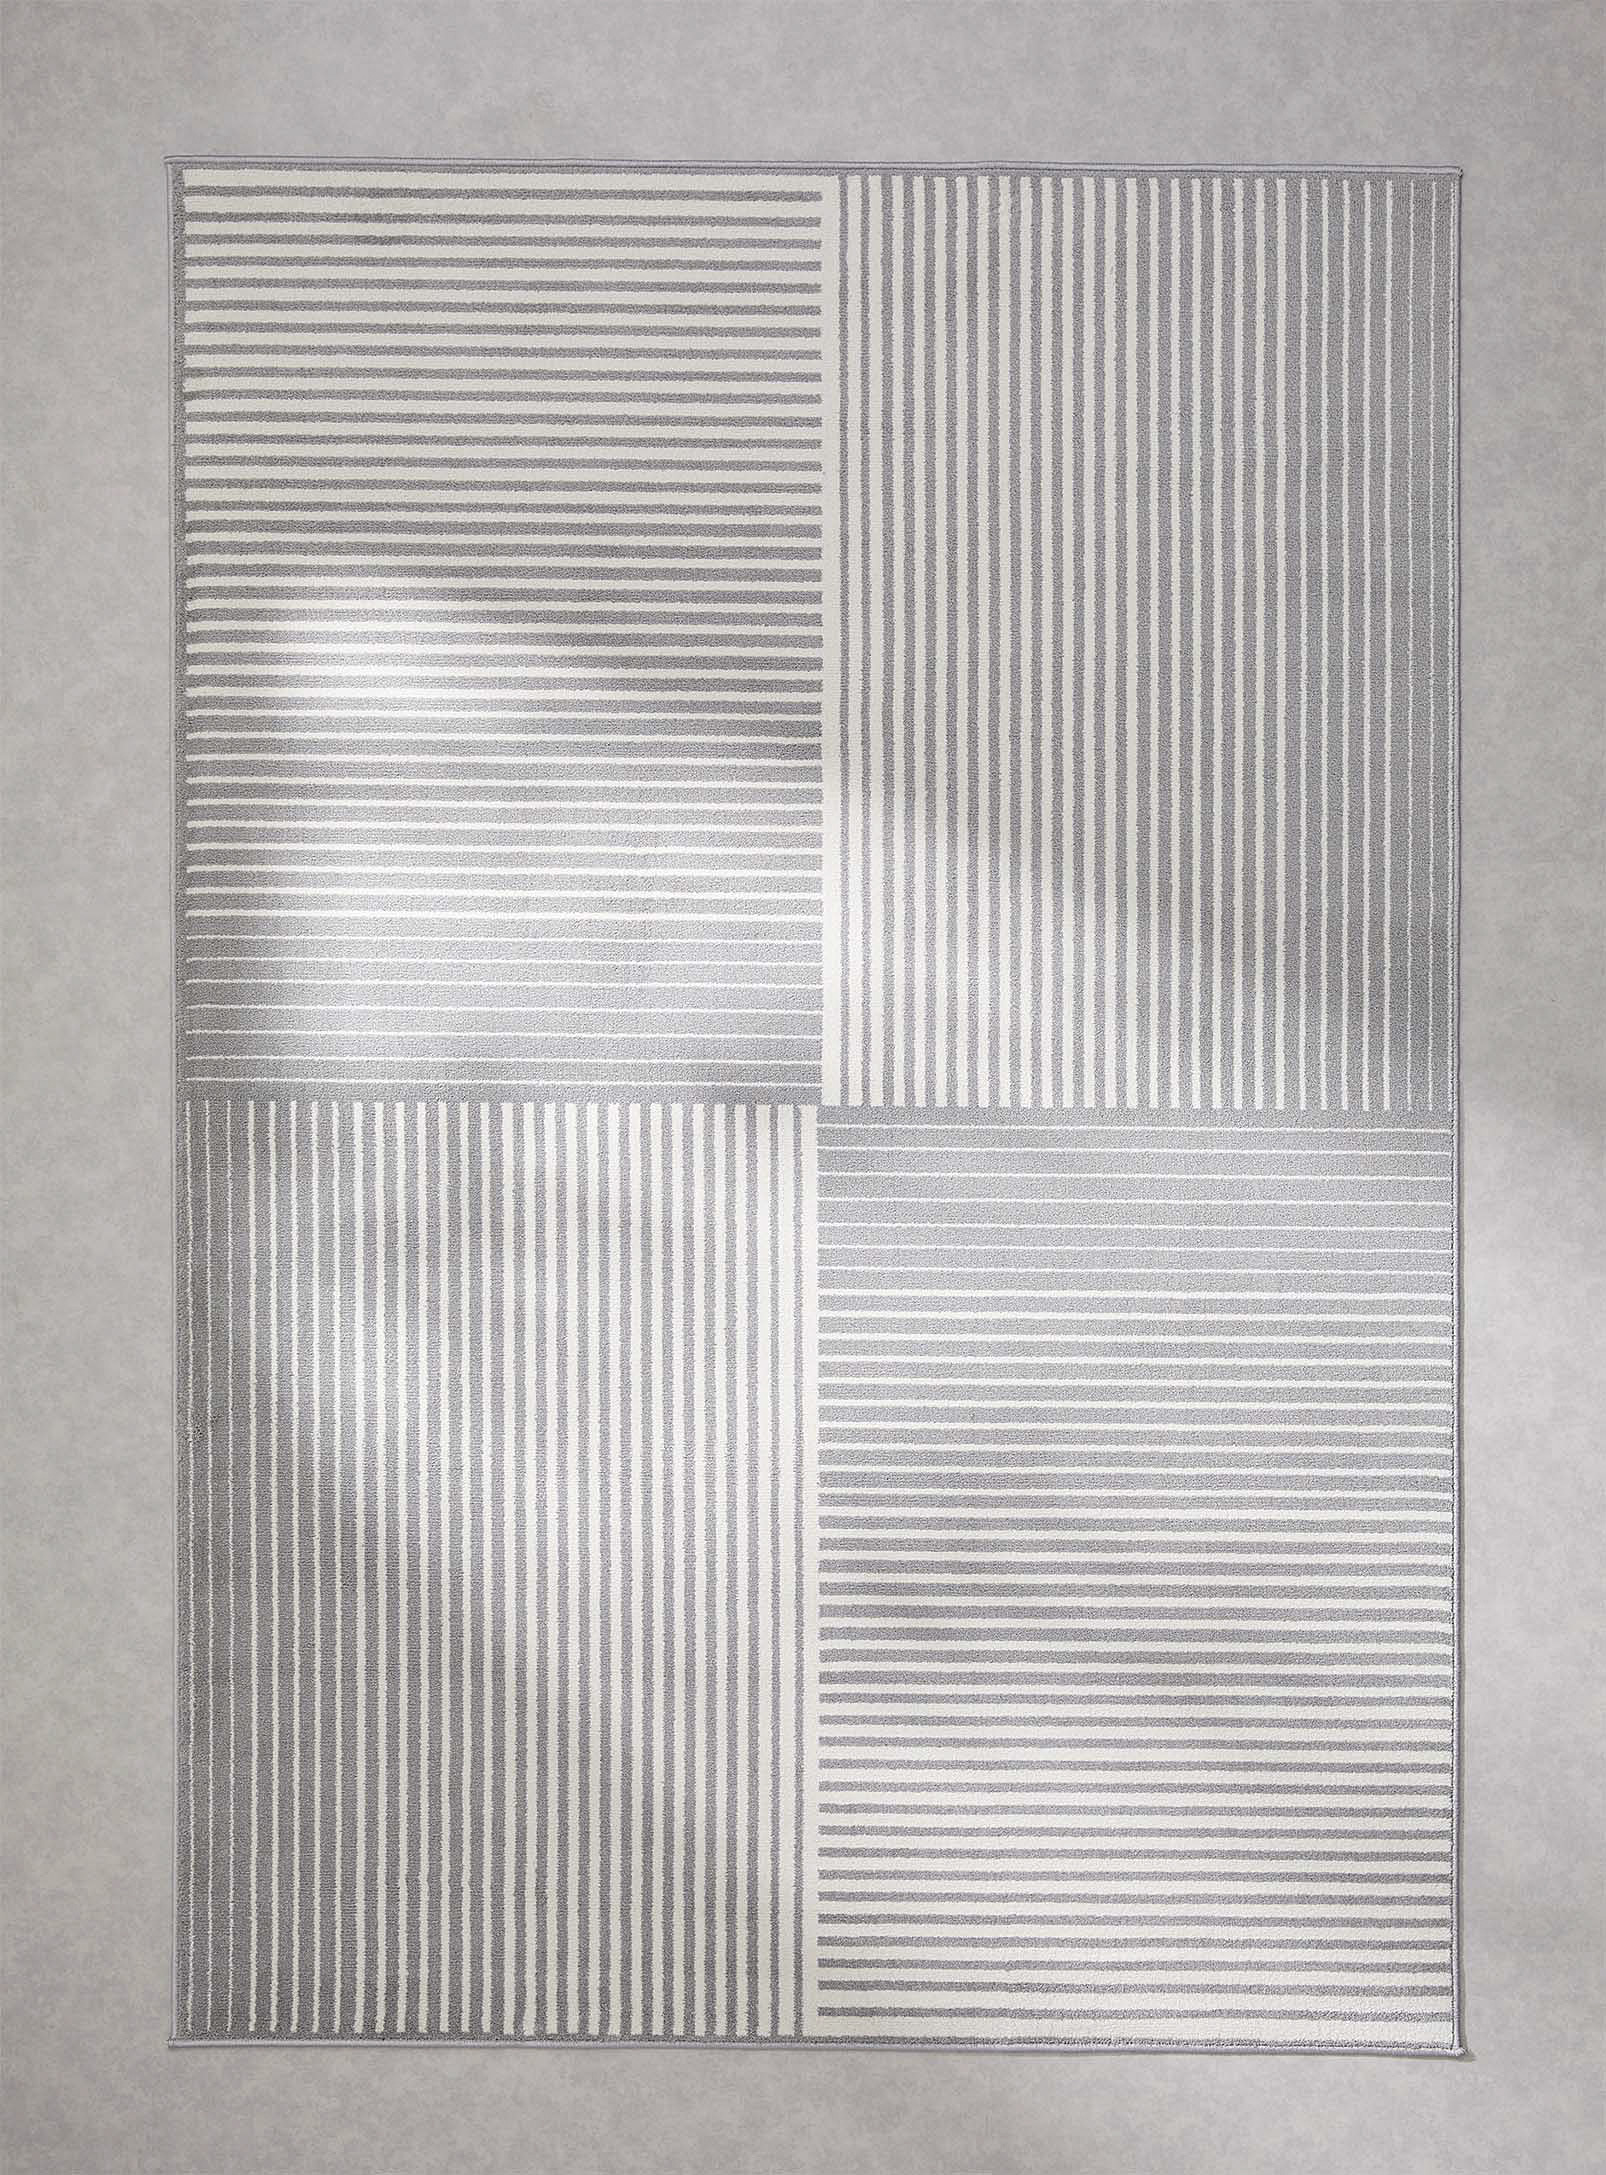 Simons Maison Bidirectional Stripes Rug See Available Sizes In Grey